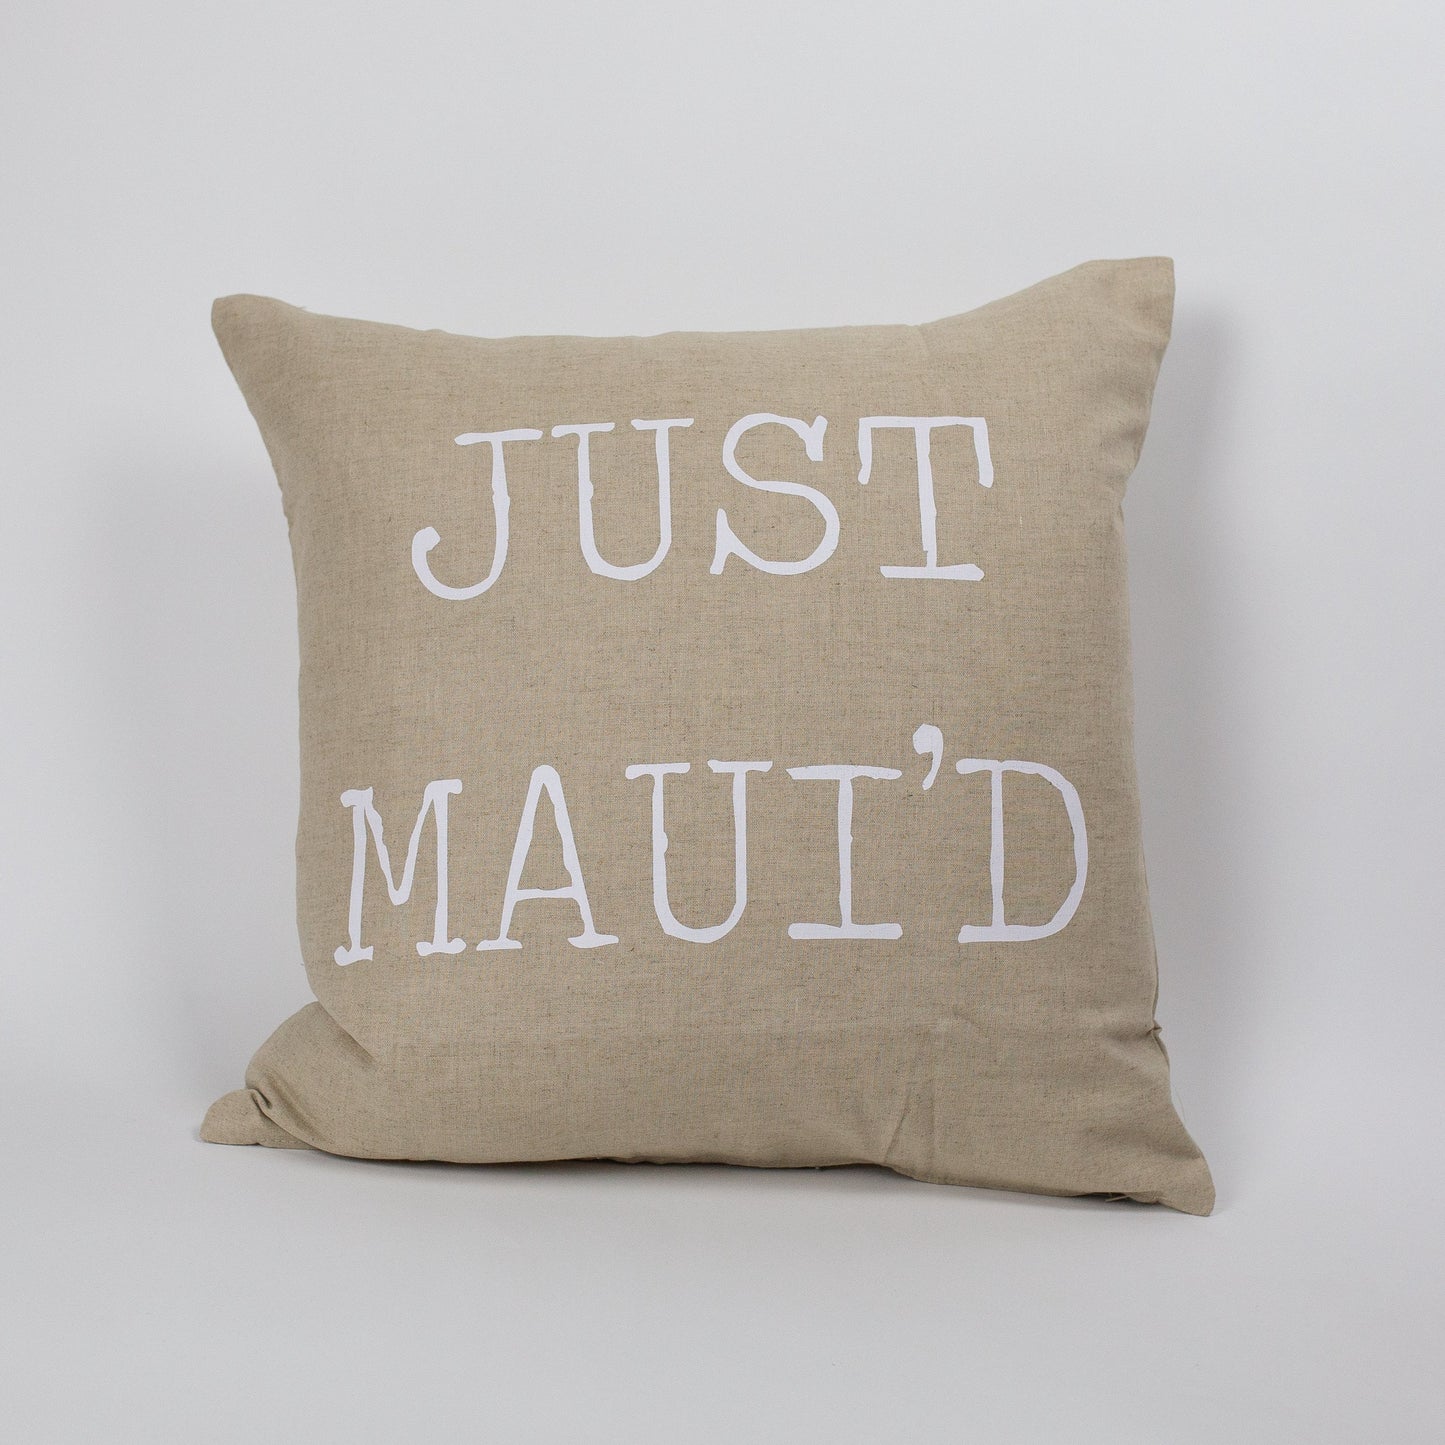 Just Maui'd Square Pillow Cover